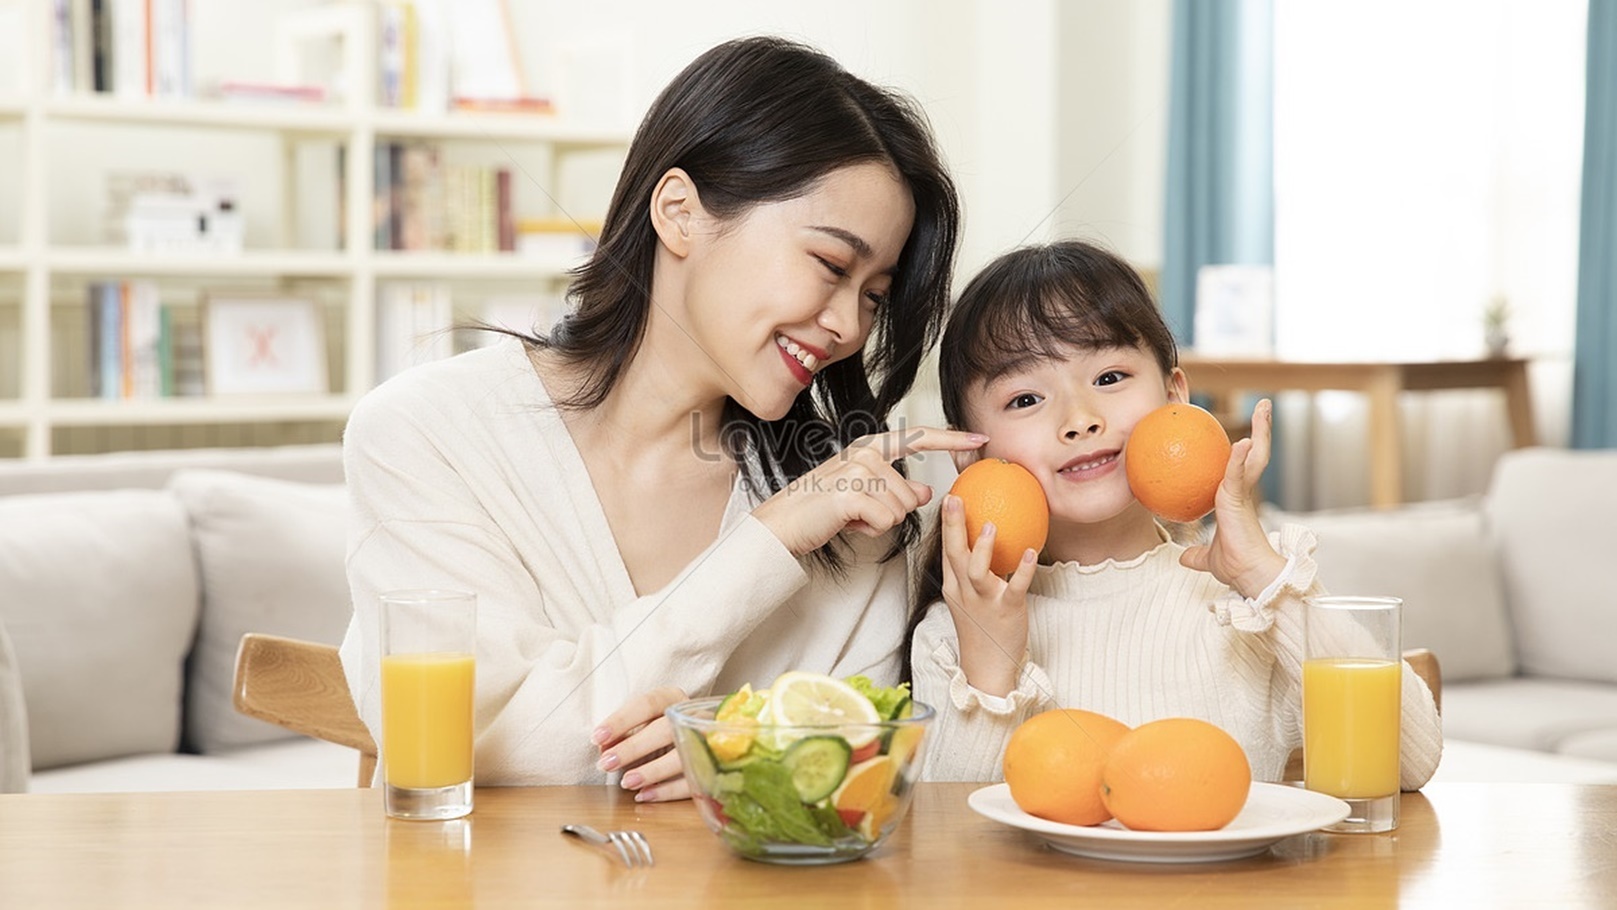 lovepik-mother-and-daughter-eating-fruit-together-picture_501567401